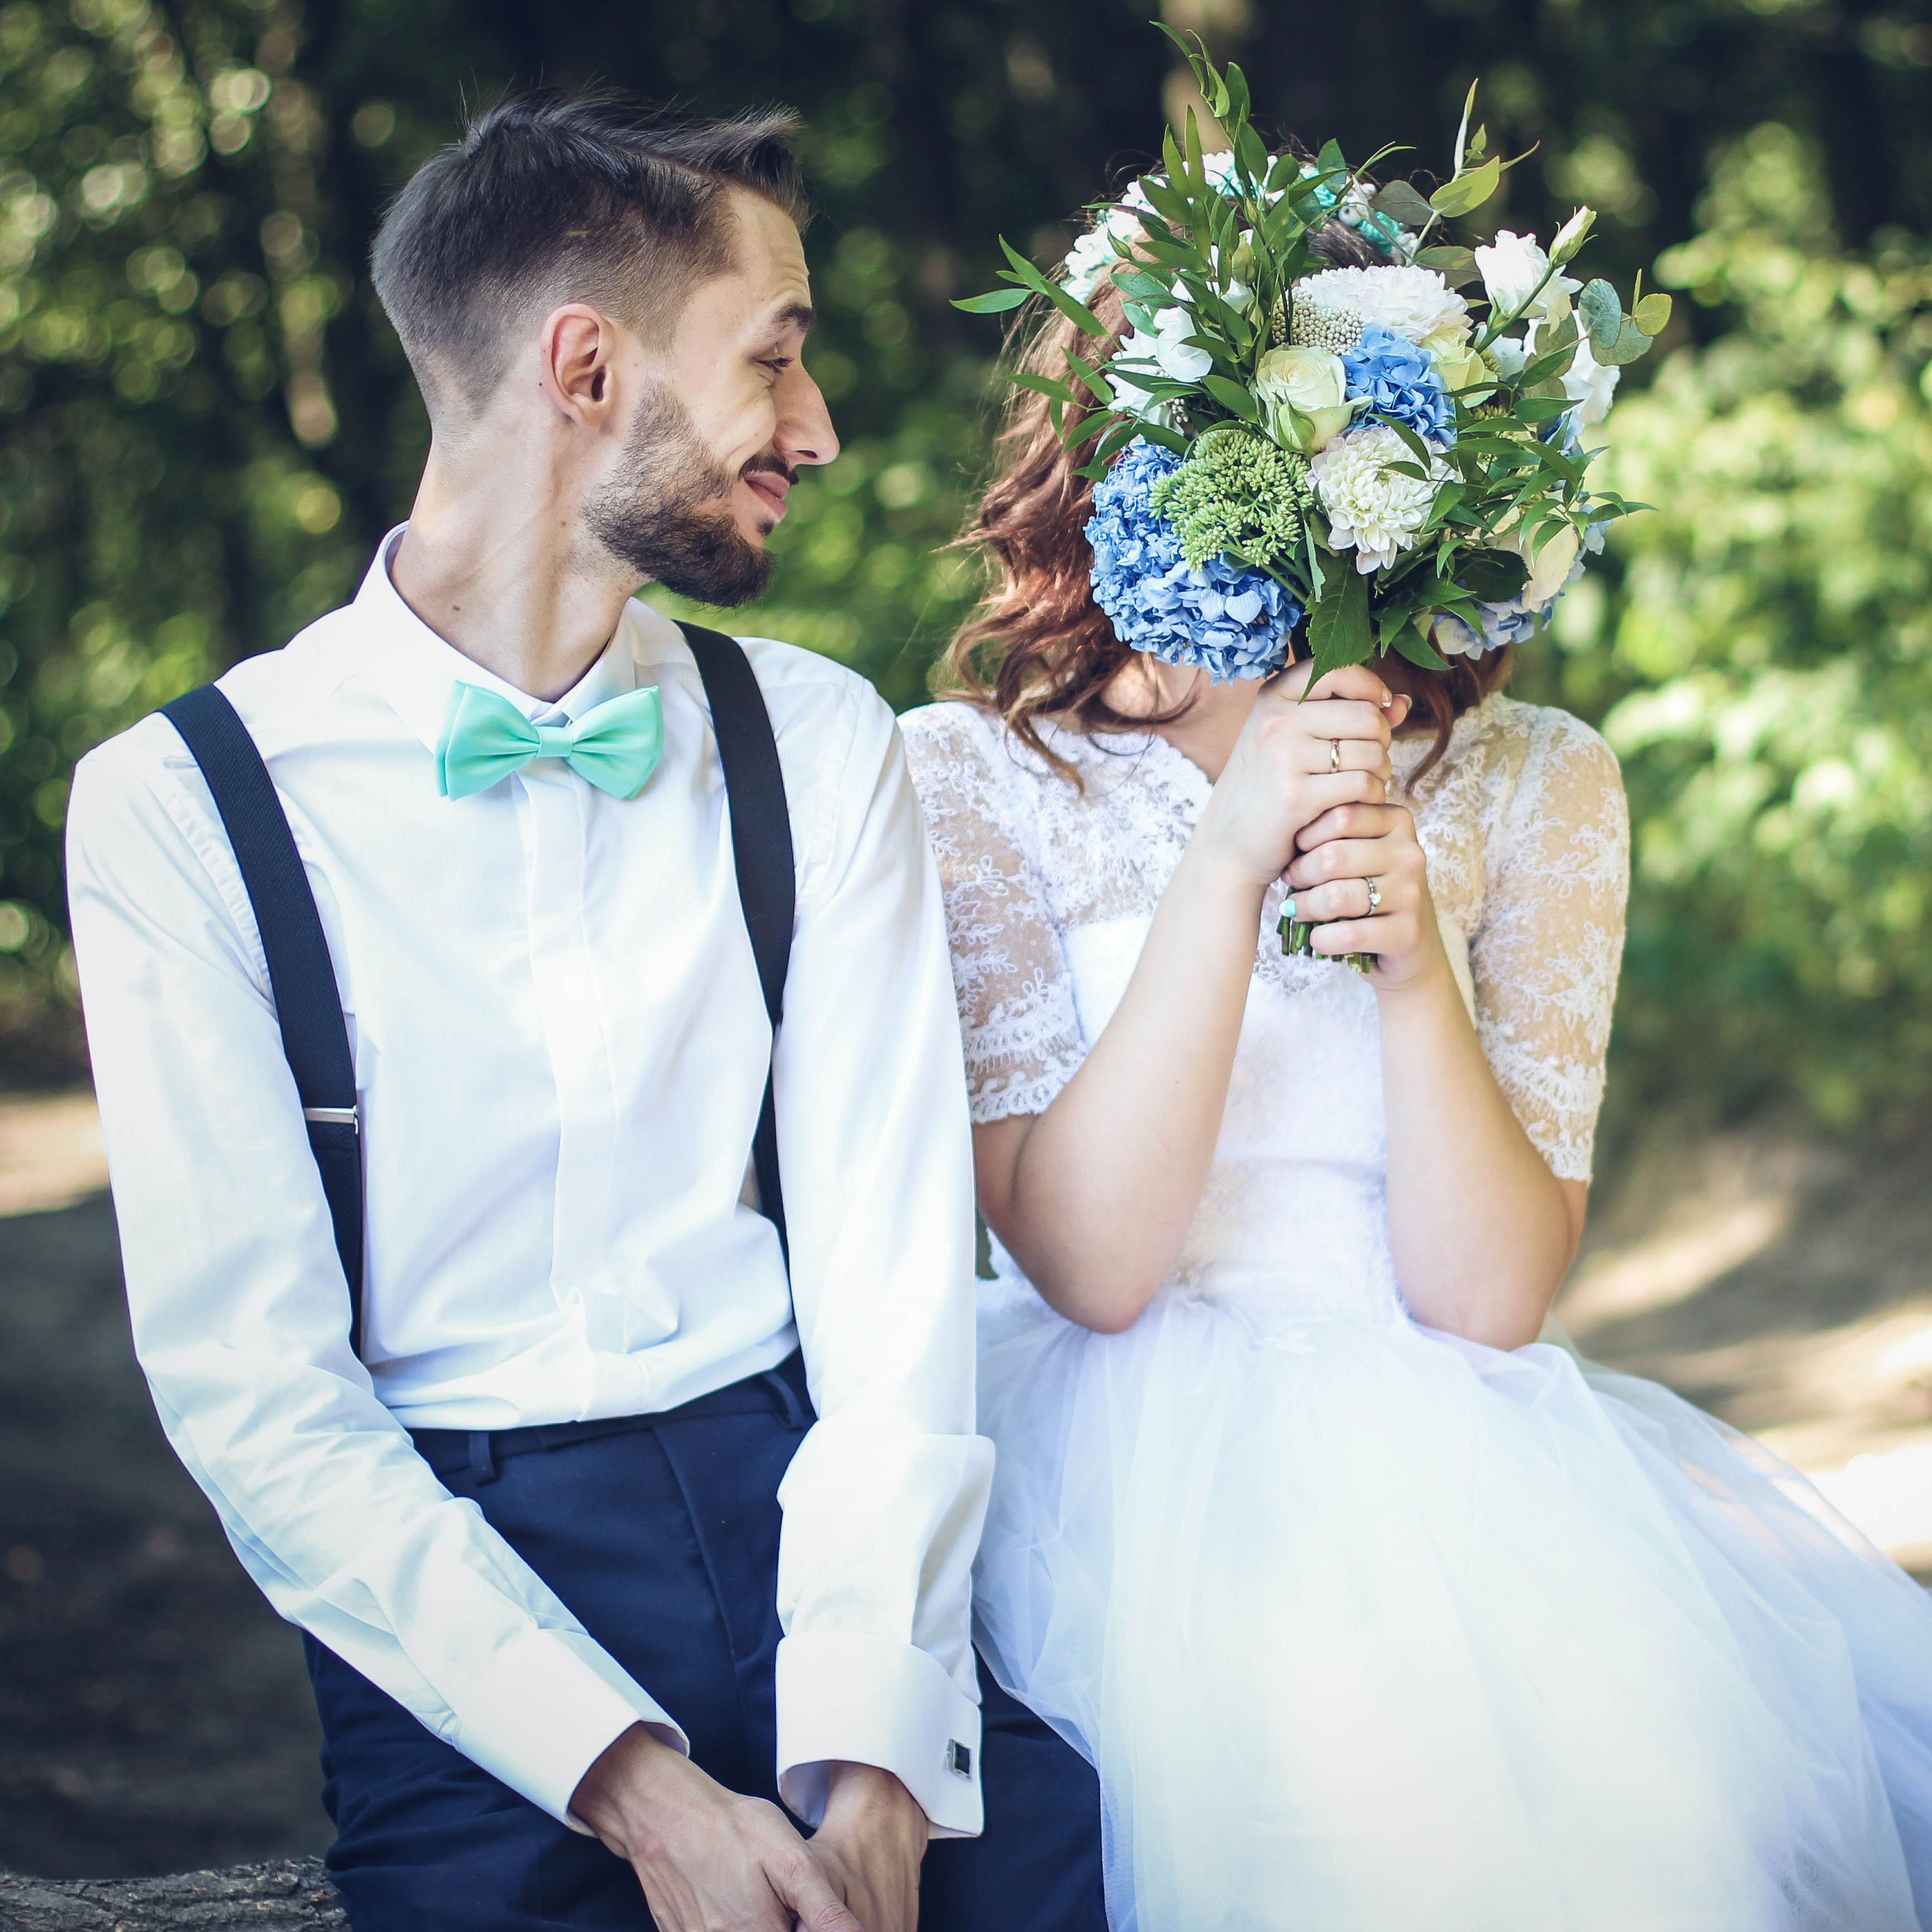 Your Wedding | Plan with These Simple Steps